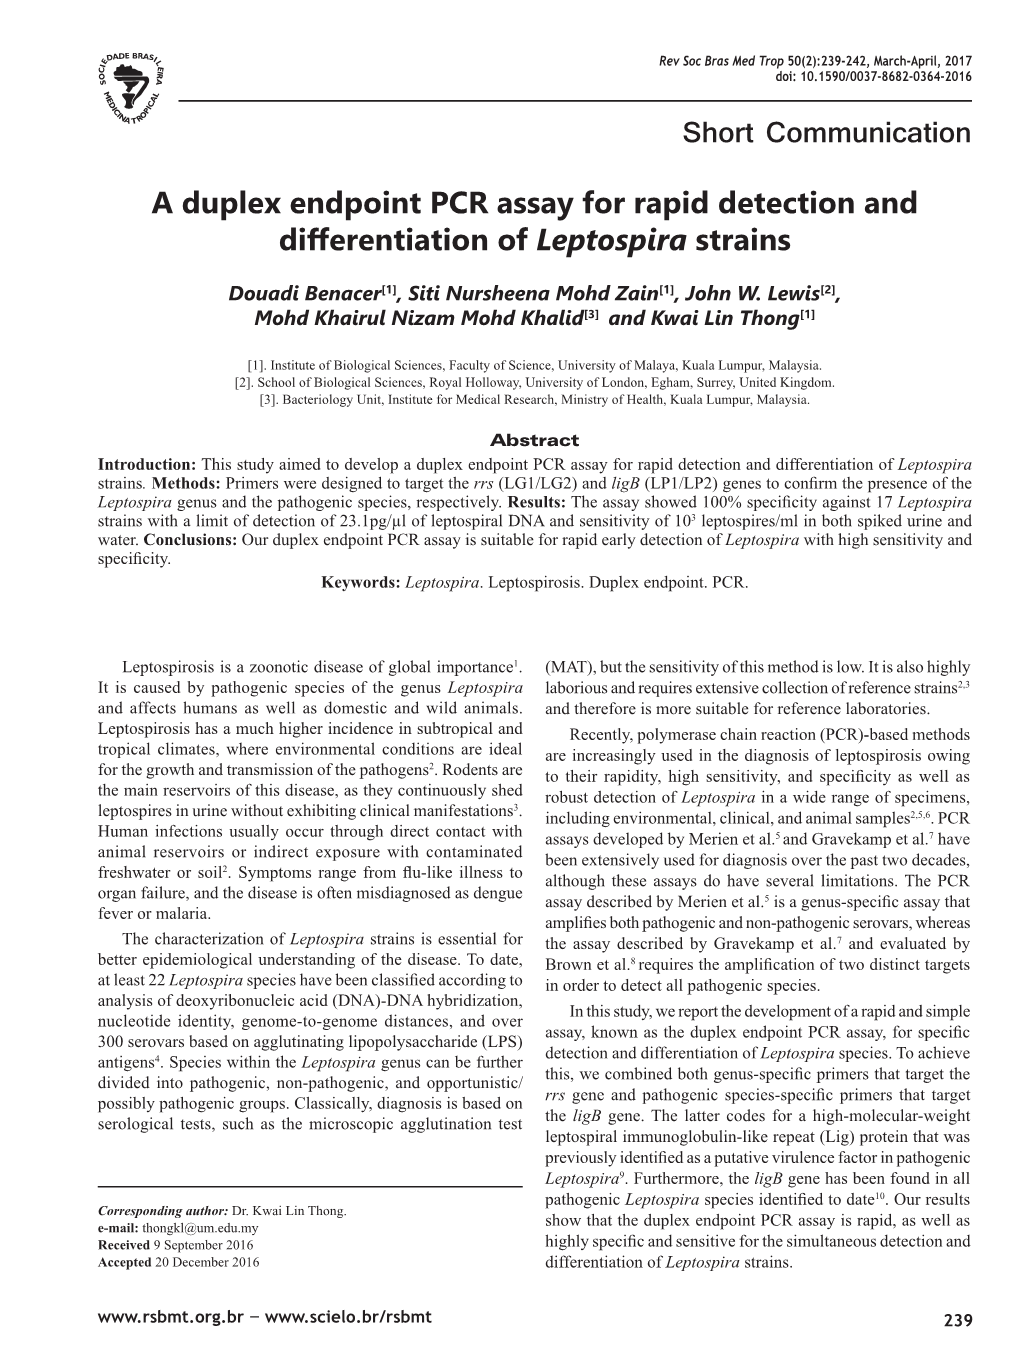 A Duplex Endpoint PCR Assay for Rapid Detection and Differentiation of Leptospira Strains